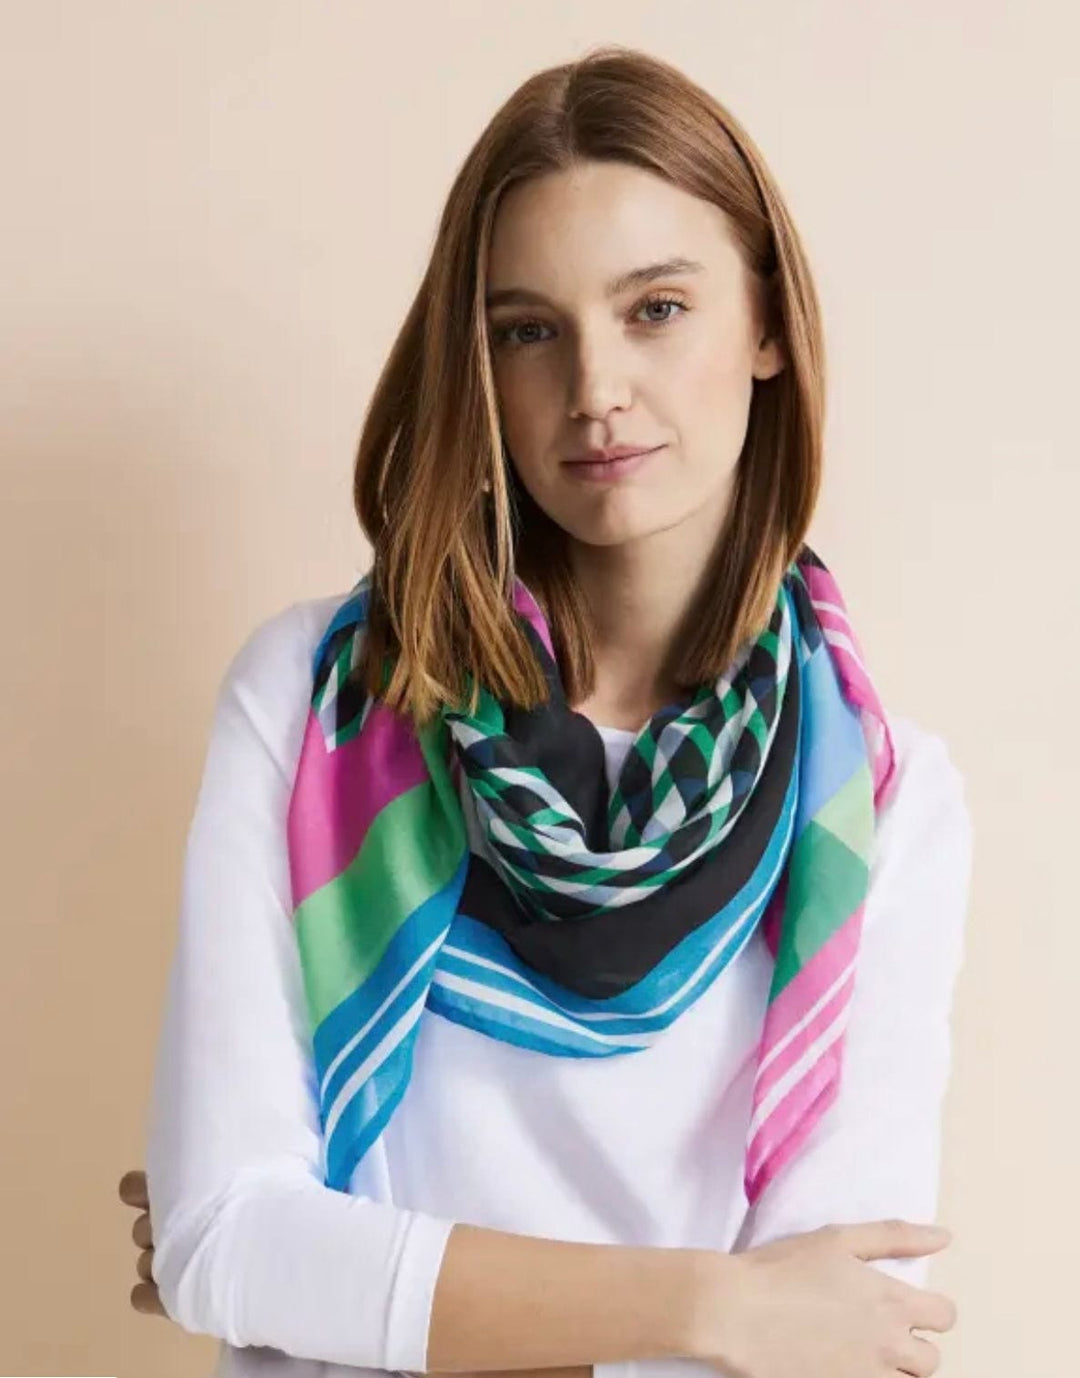 Street One Printed Triangle Scarf In Multicolour - Crabtree Cottage